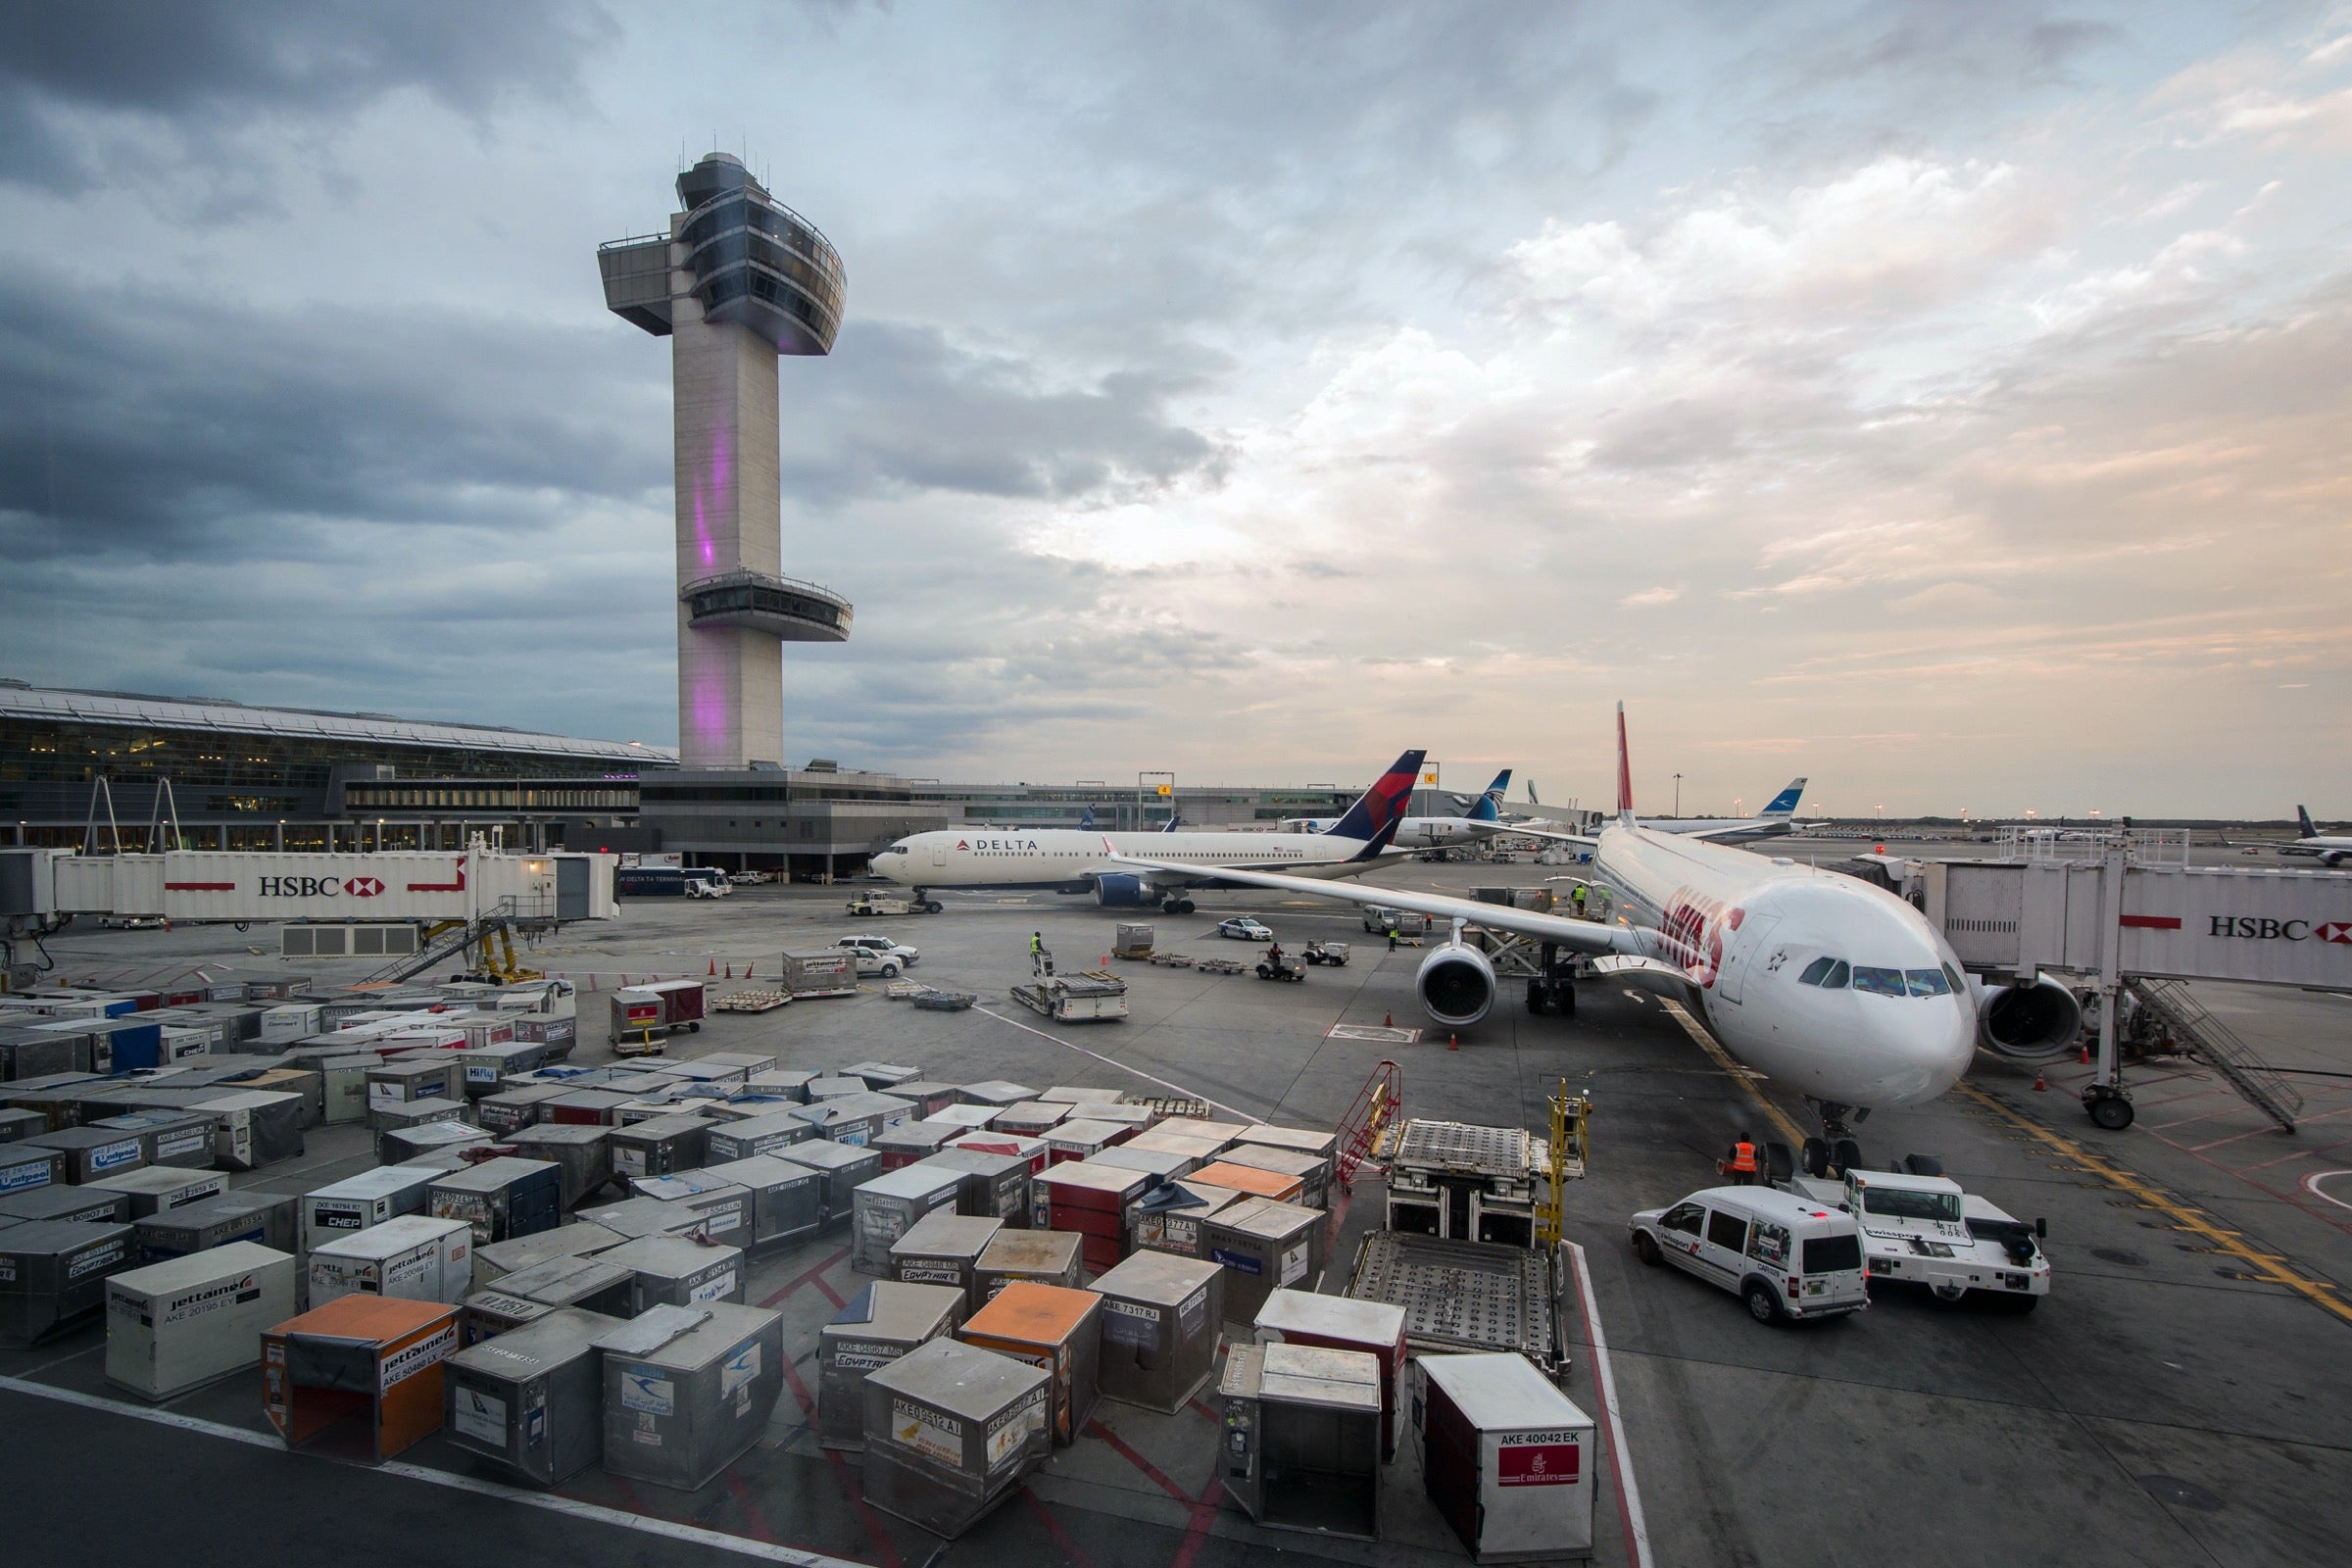 Airplanes on the ground at New York-JFK airport